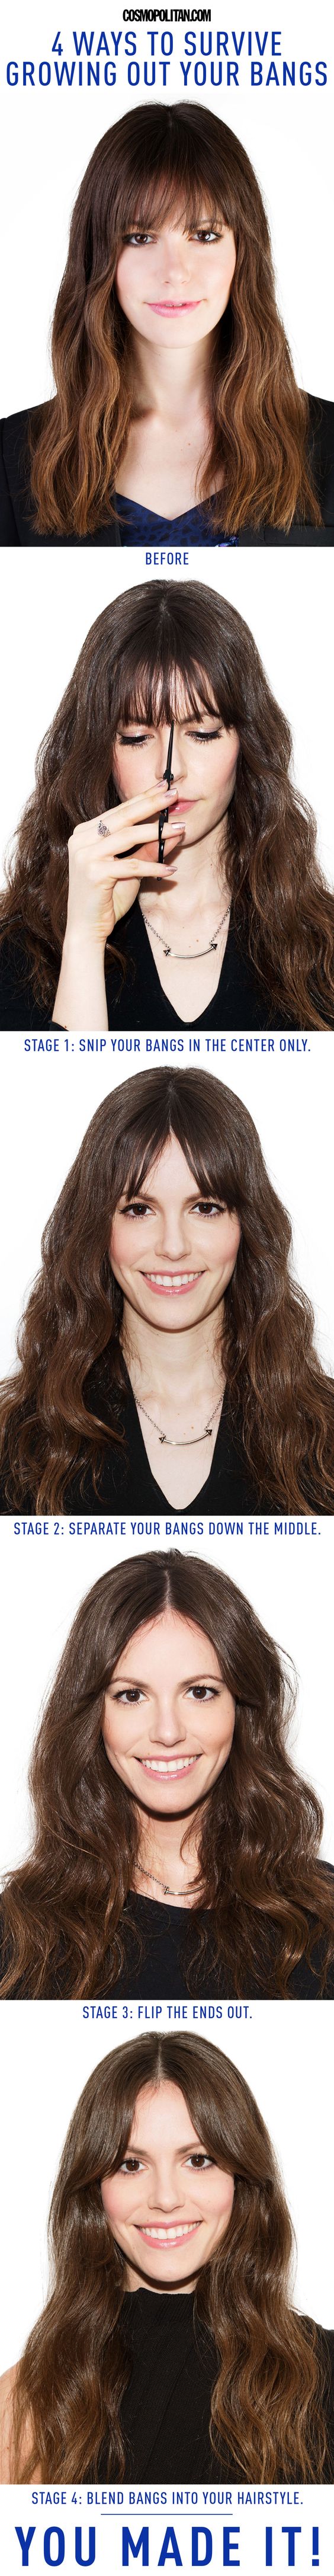 How-to-Style-Your-Bangs about